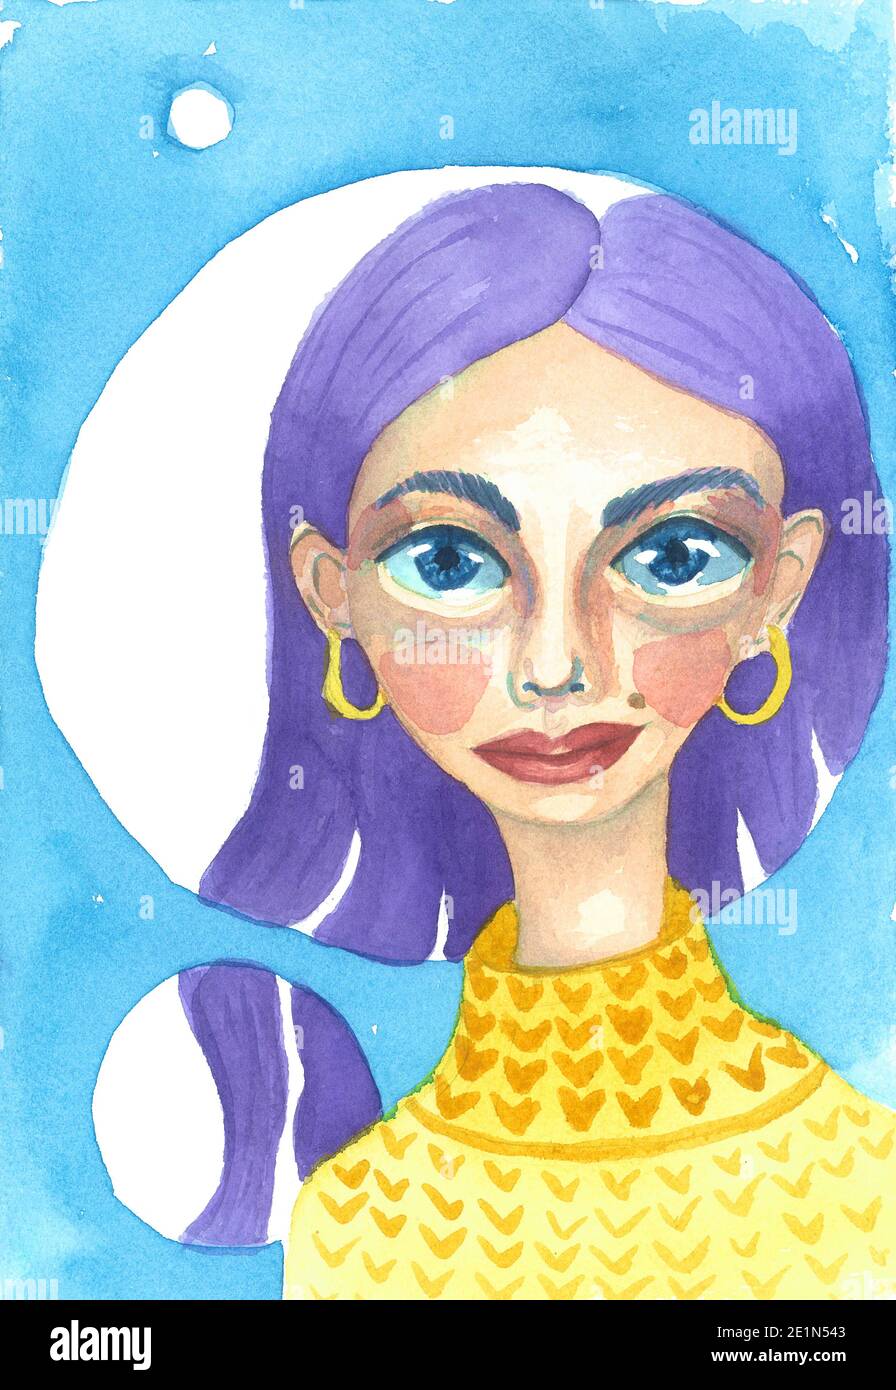 Portrait, Icon of beautiful female cartoon face with earrings. Illustration. Stock Photo